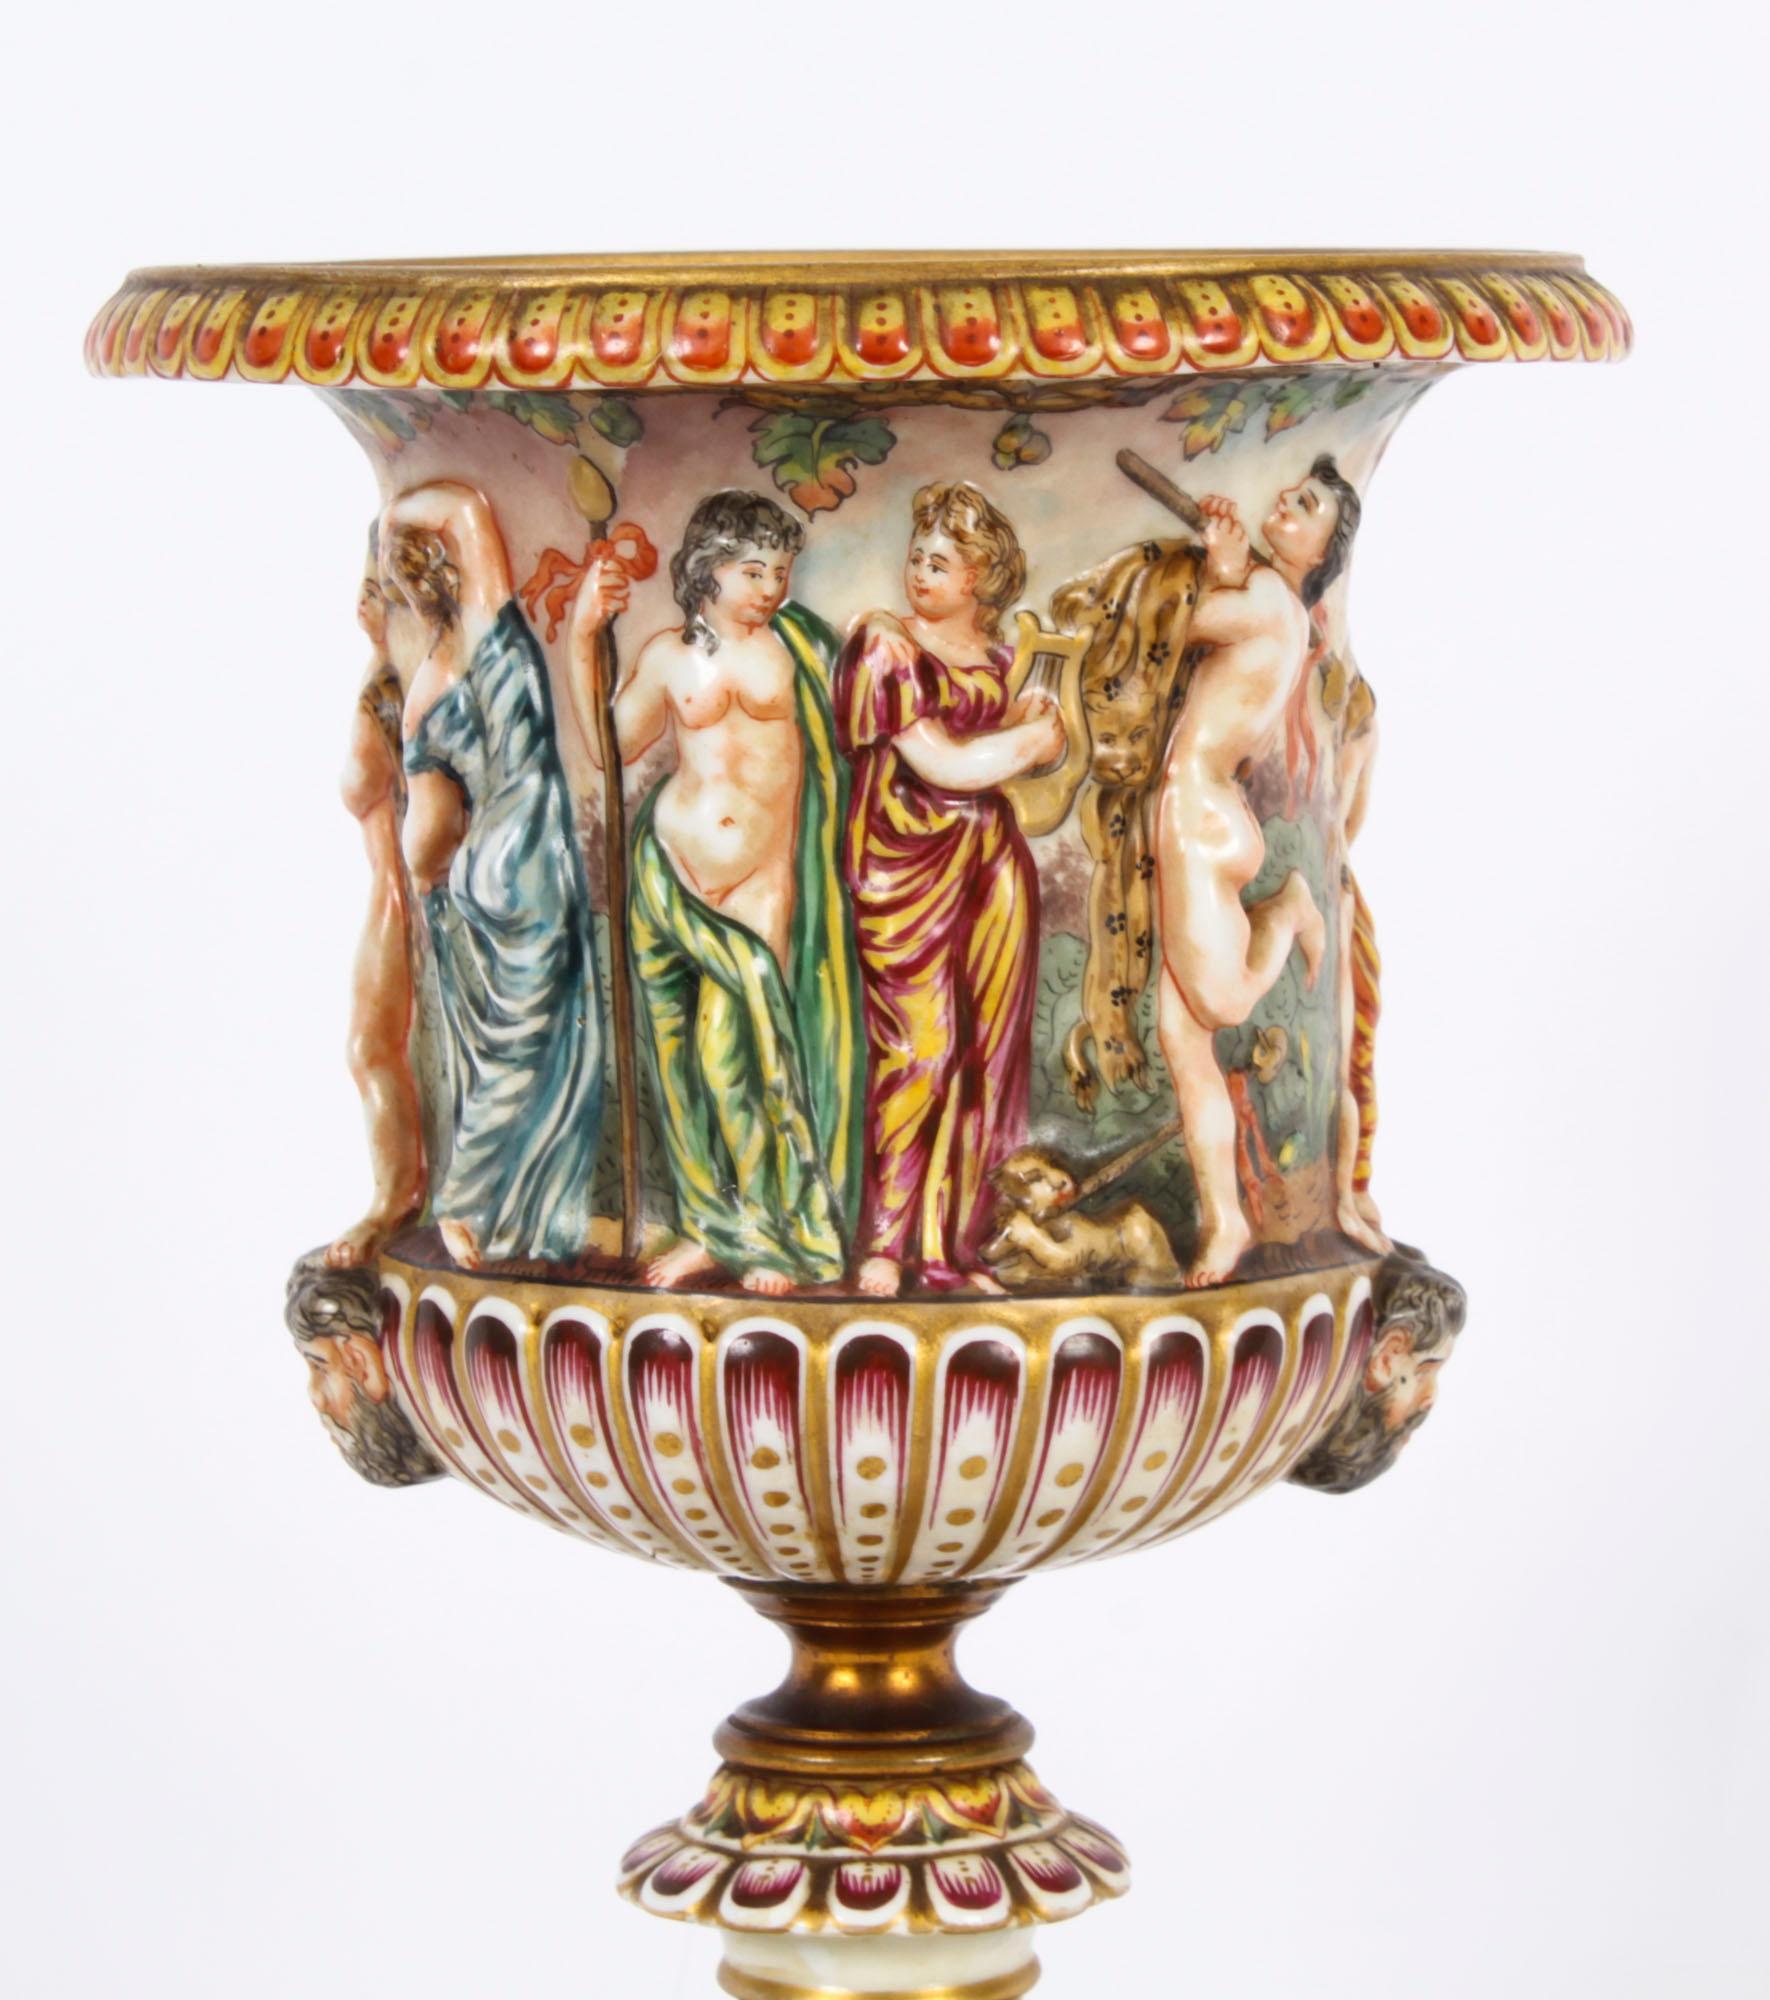 This is a beautiful antique Italian Naples Capodimonte porcelain  urn, late 19th Century in date and bearing the Naples Capodimonte blue painted crown signature on the underside.

Superbly decorated with polychrome enamels  in relief with classical